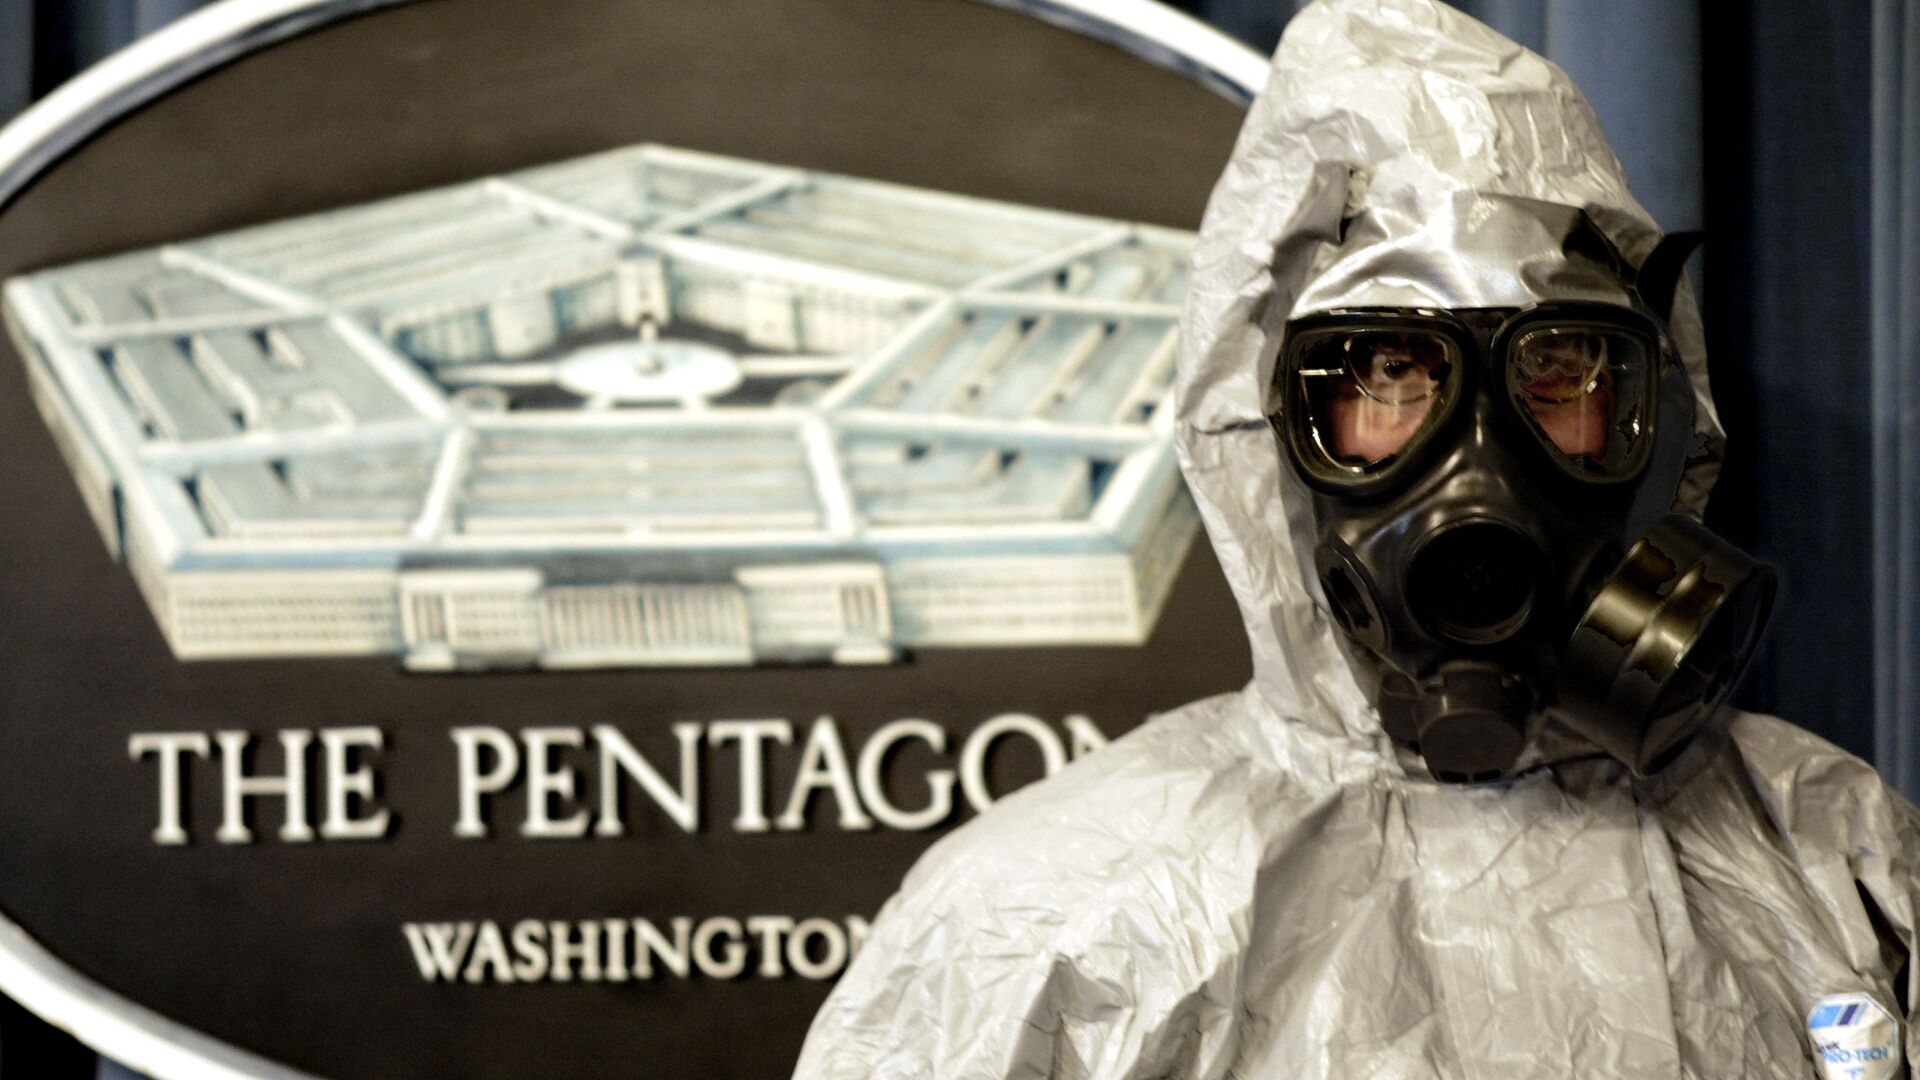 A member of the US Army Technical Escort Unit (TSU) demonstrates a hazmat suit as they show some of their response capabilities to chemical and biological operations in support of the US Department of Defense, federal, state, and local agencies 12 November 2002. - Sputnik International, 1920, 06.09.2021